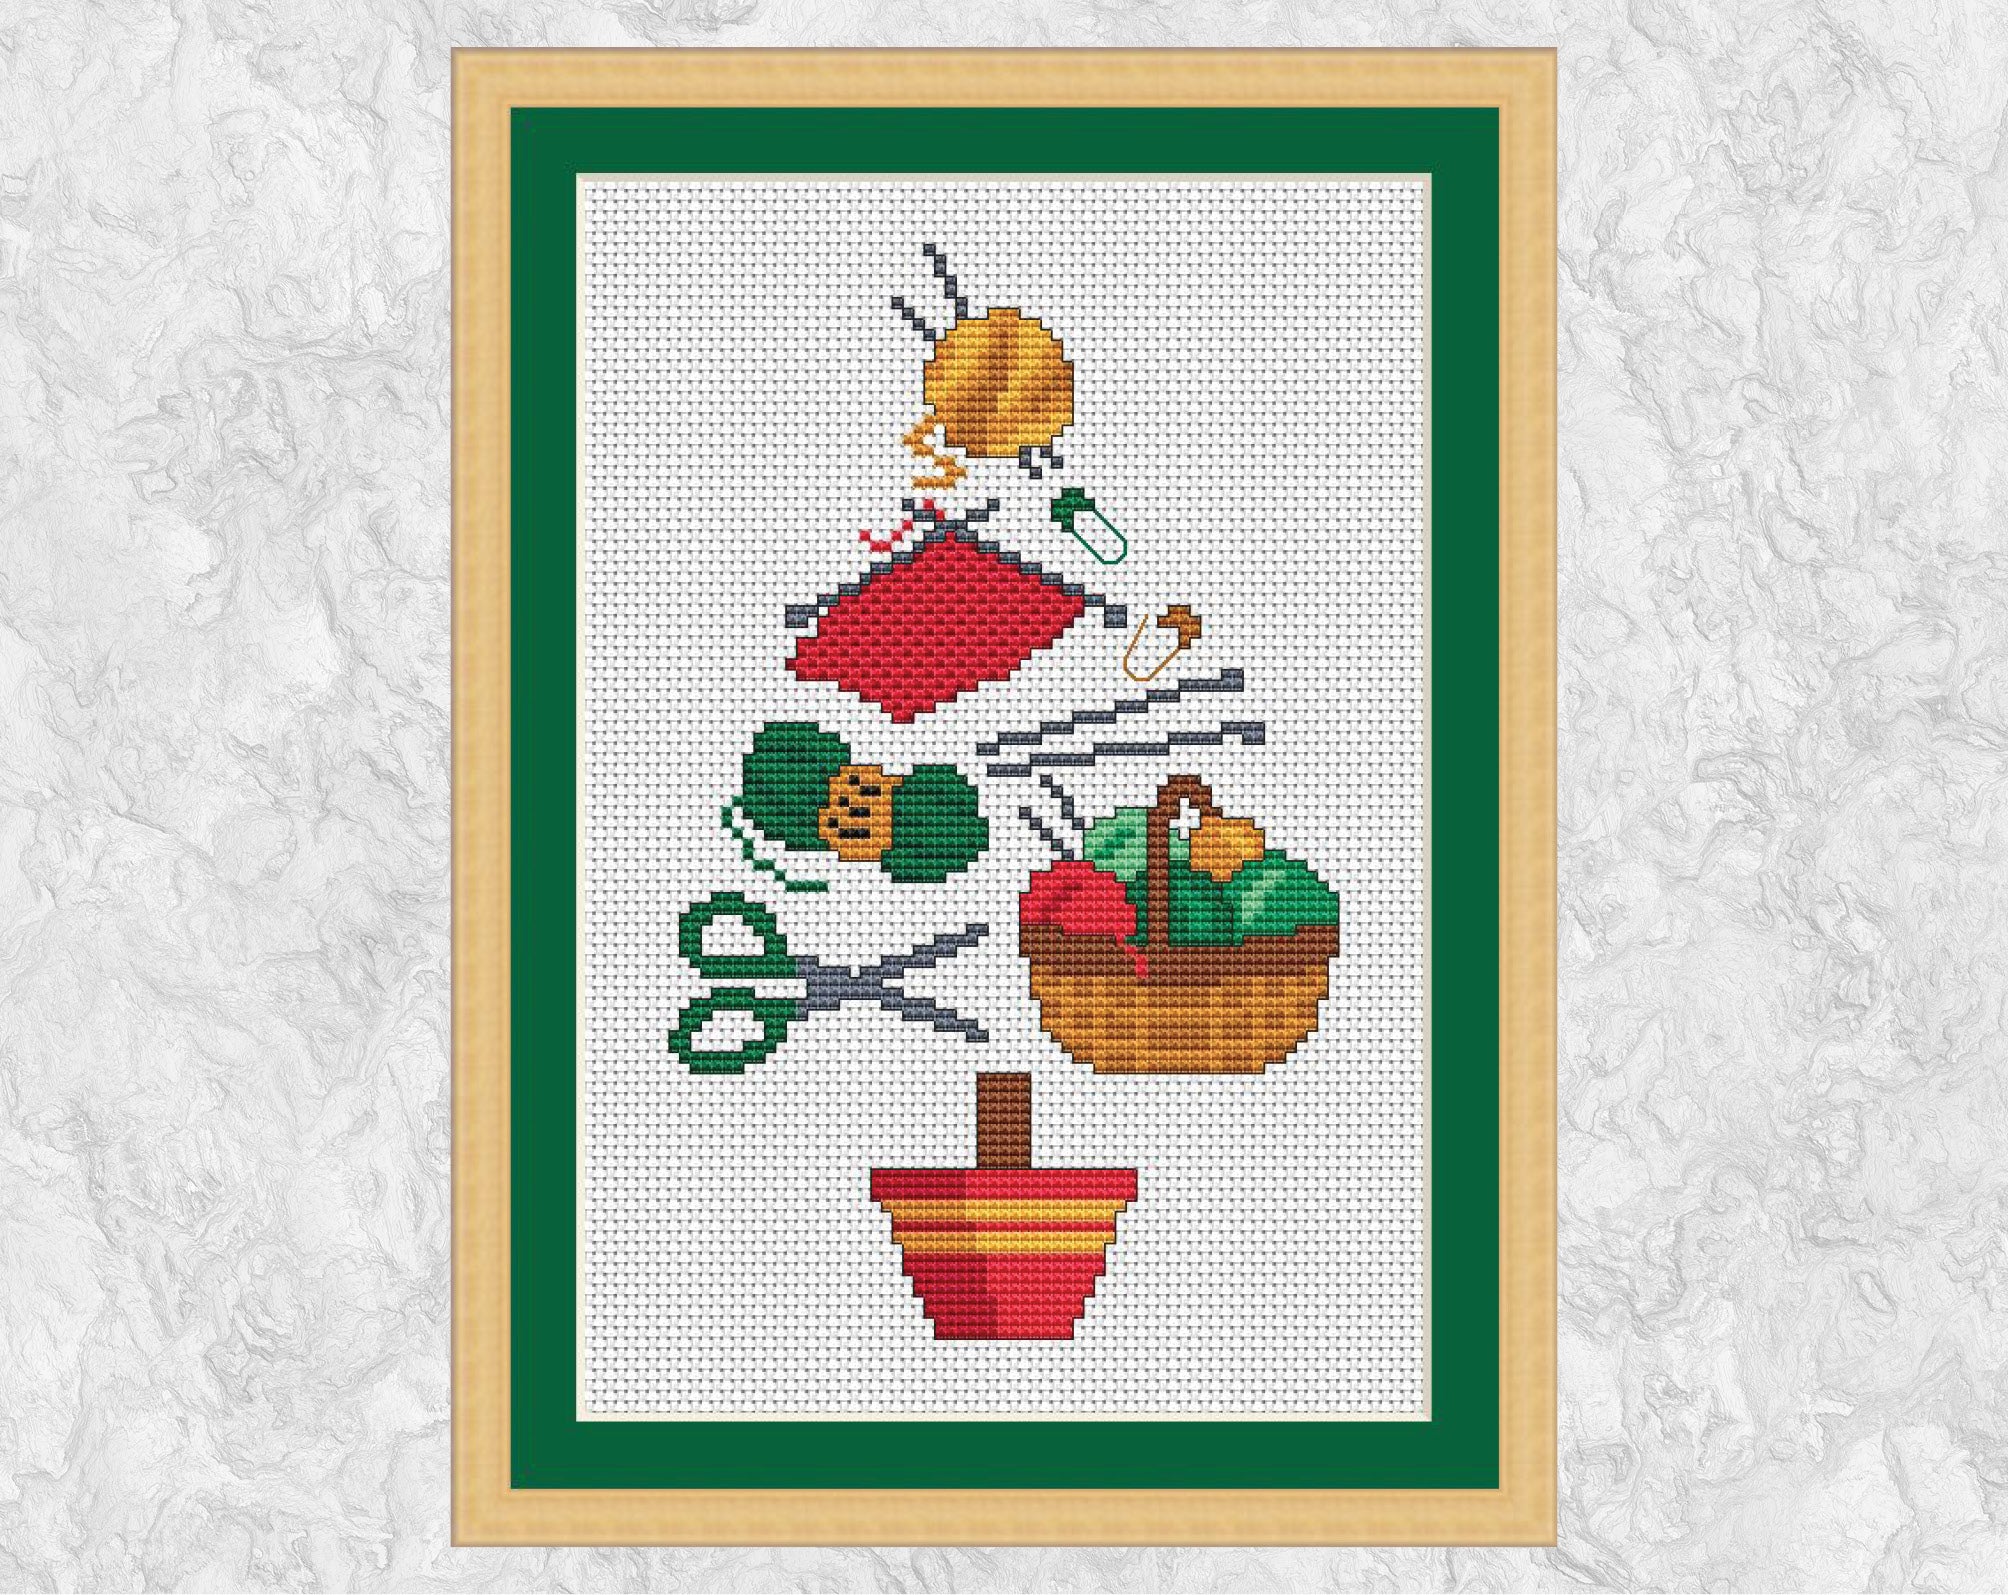 Knitting Christmas Tree cross stitch pattern. A Christmas tree shape made up of yarn, knitting, knitting needles, scissors, a basket of yarn and stitch markers. Shown with frame.